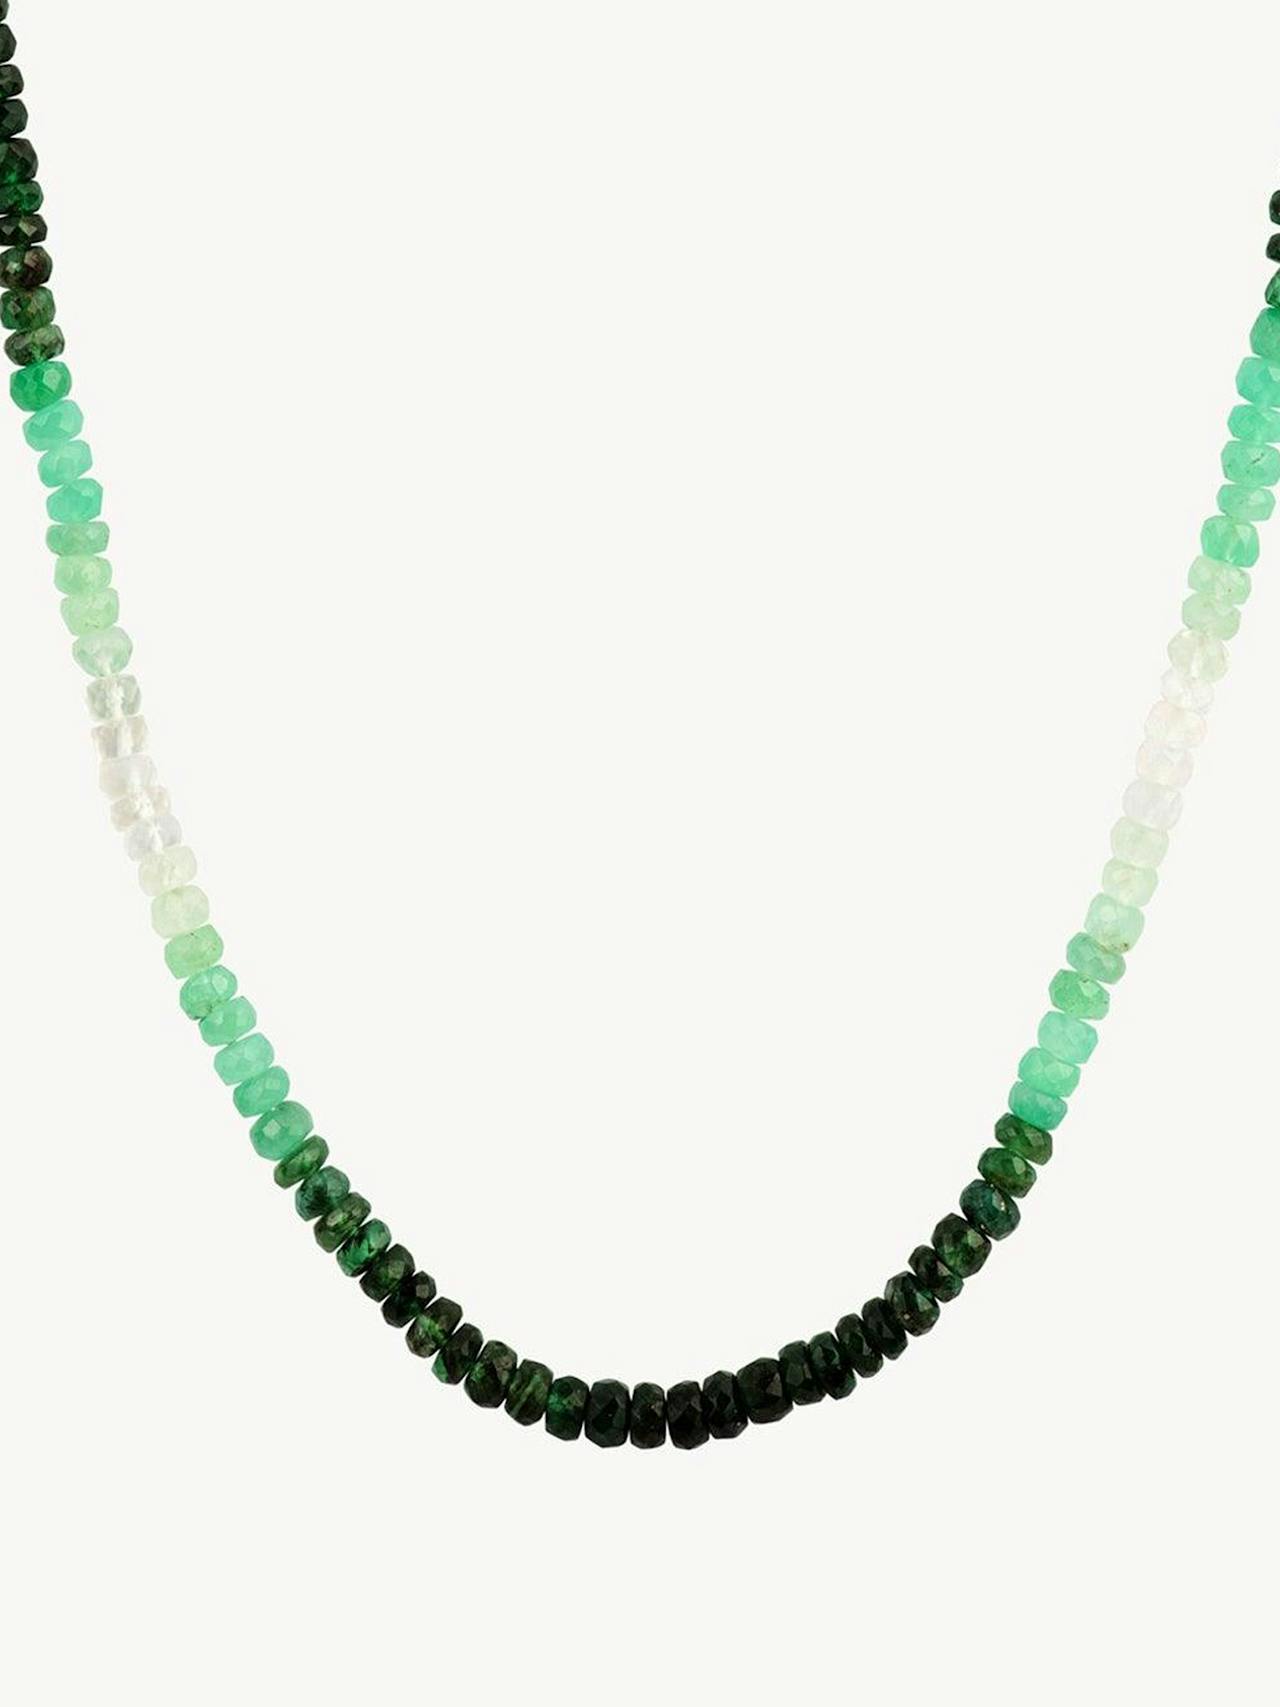 Graduated green emerald necklace